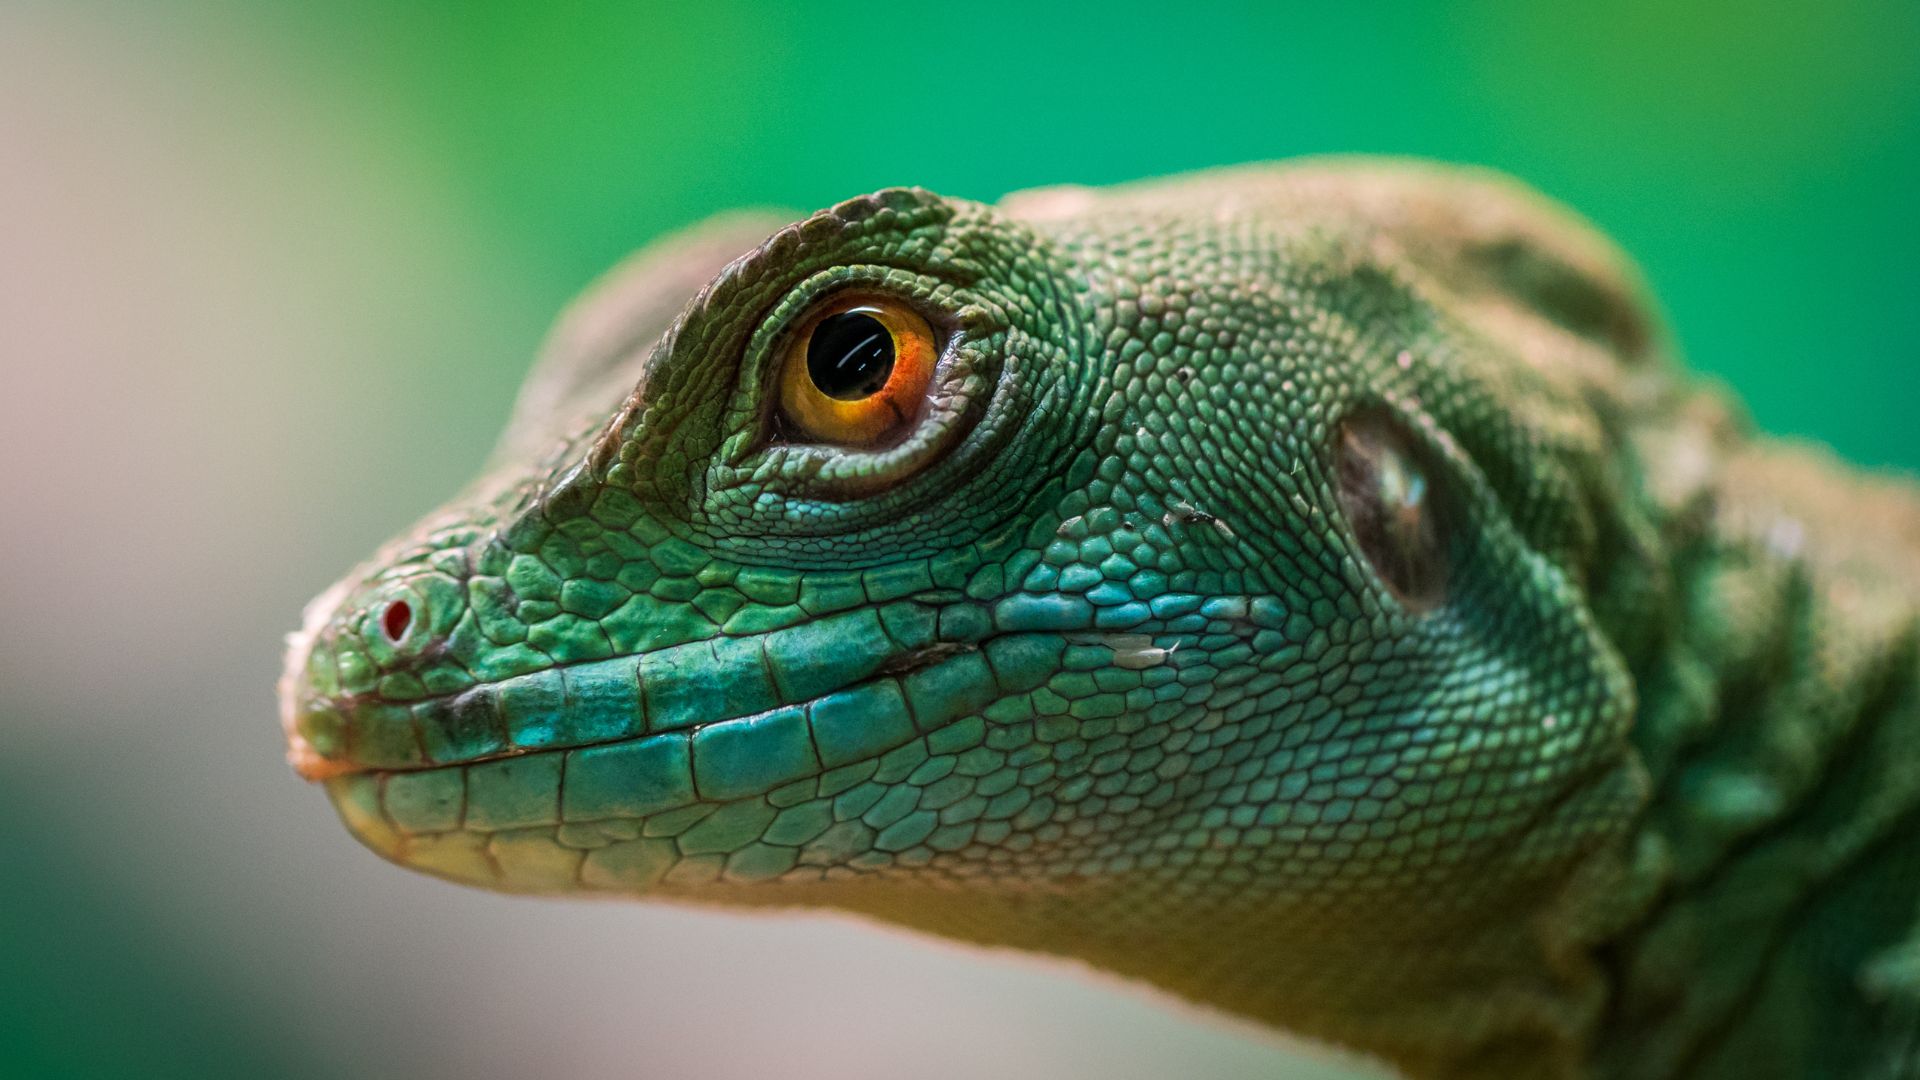 Picture of a Reptile close up